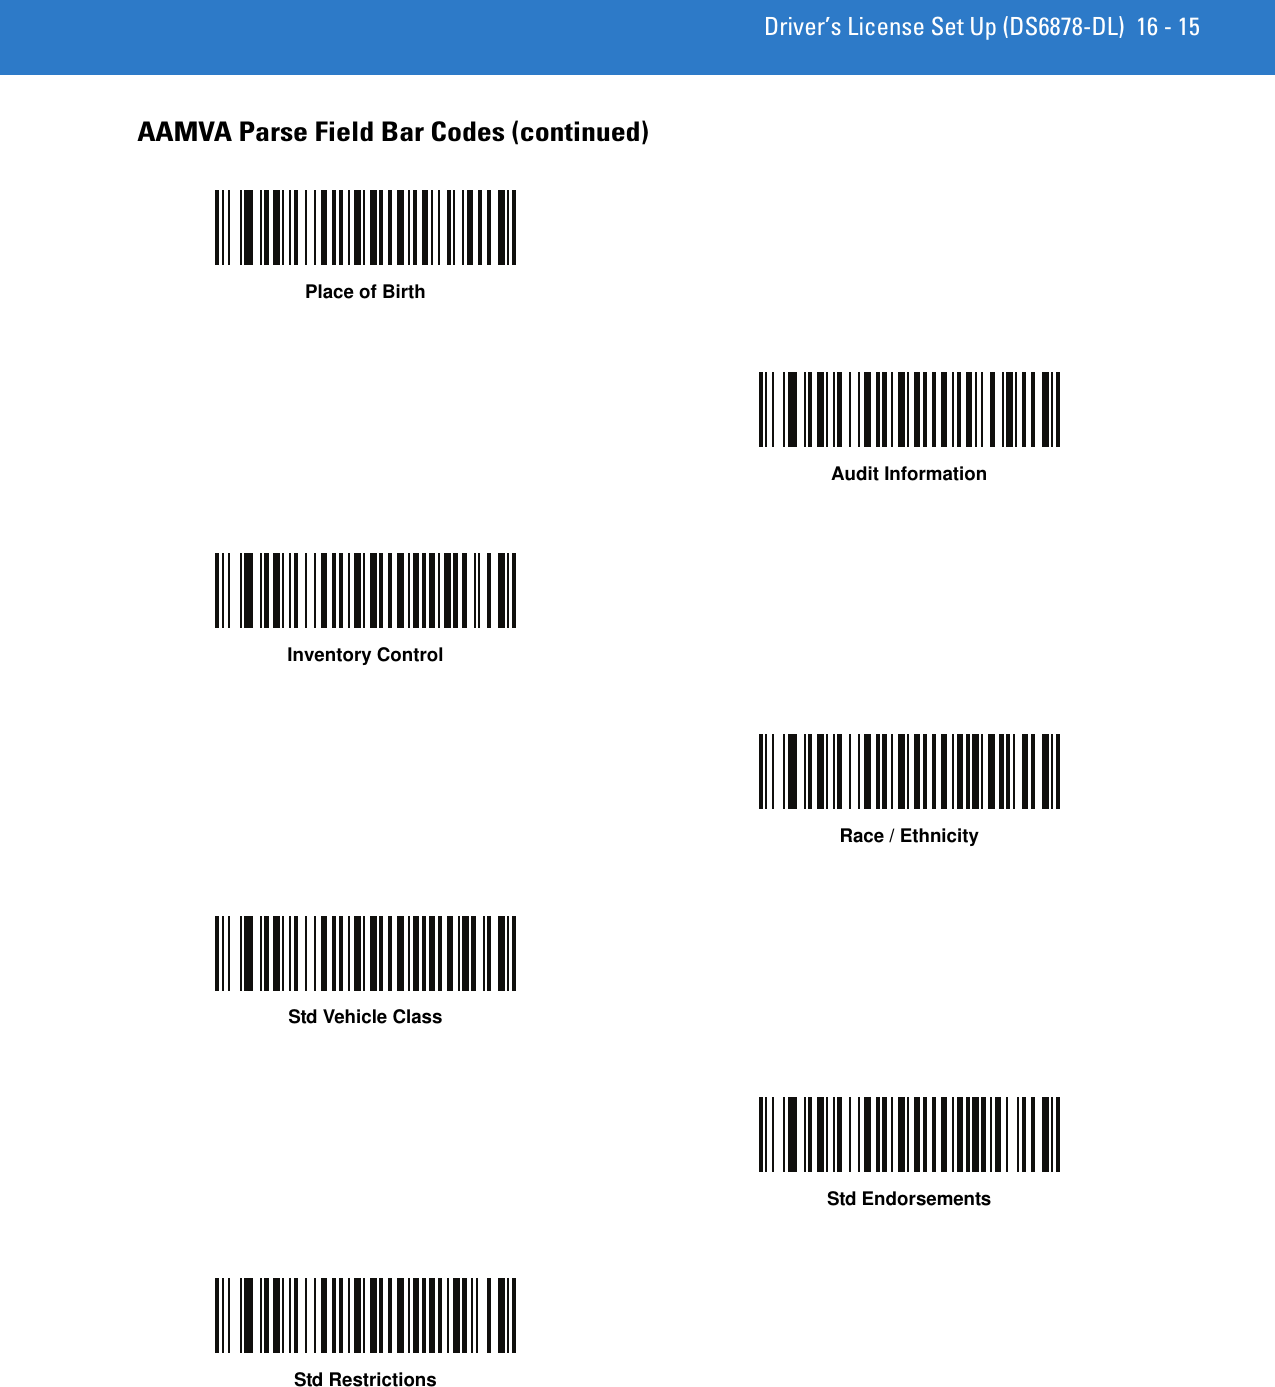 Driver’s License Set Up (DS6878-DL) 16 - 15AAMVA Parse Field Bar Codes (continued)Place of BirthAudit InformationInventory ControlRace / EthnicityStd Vehicle ClassStd EndorsementsStd Restrictions